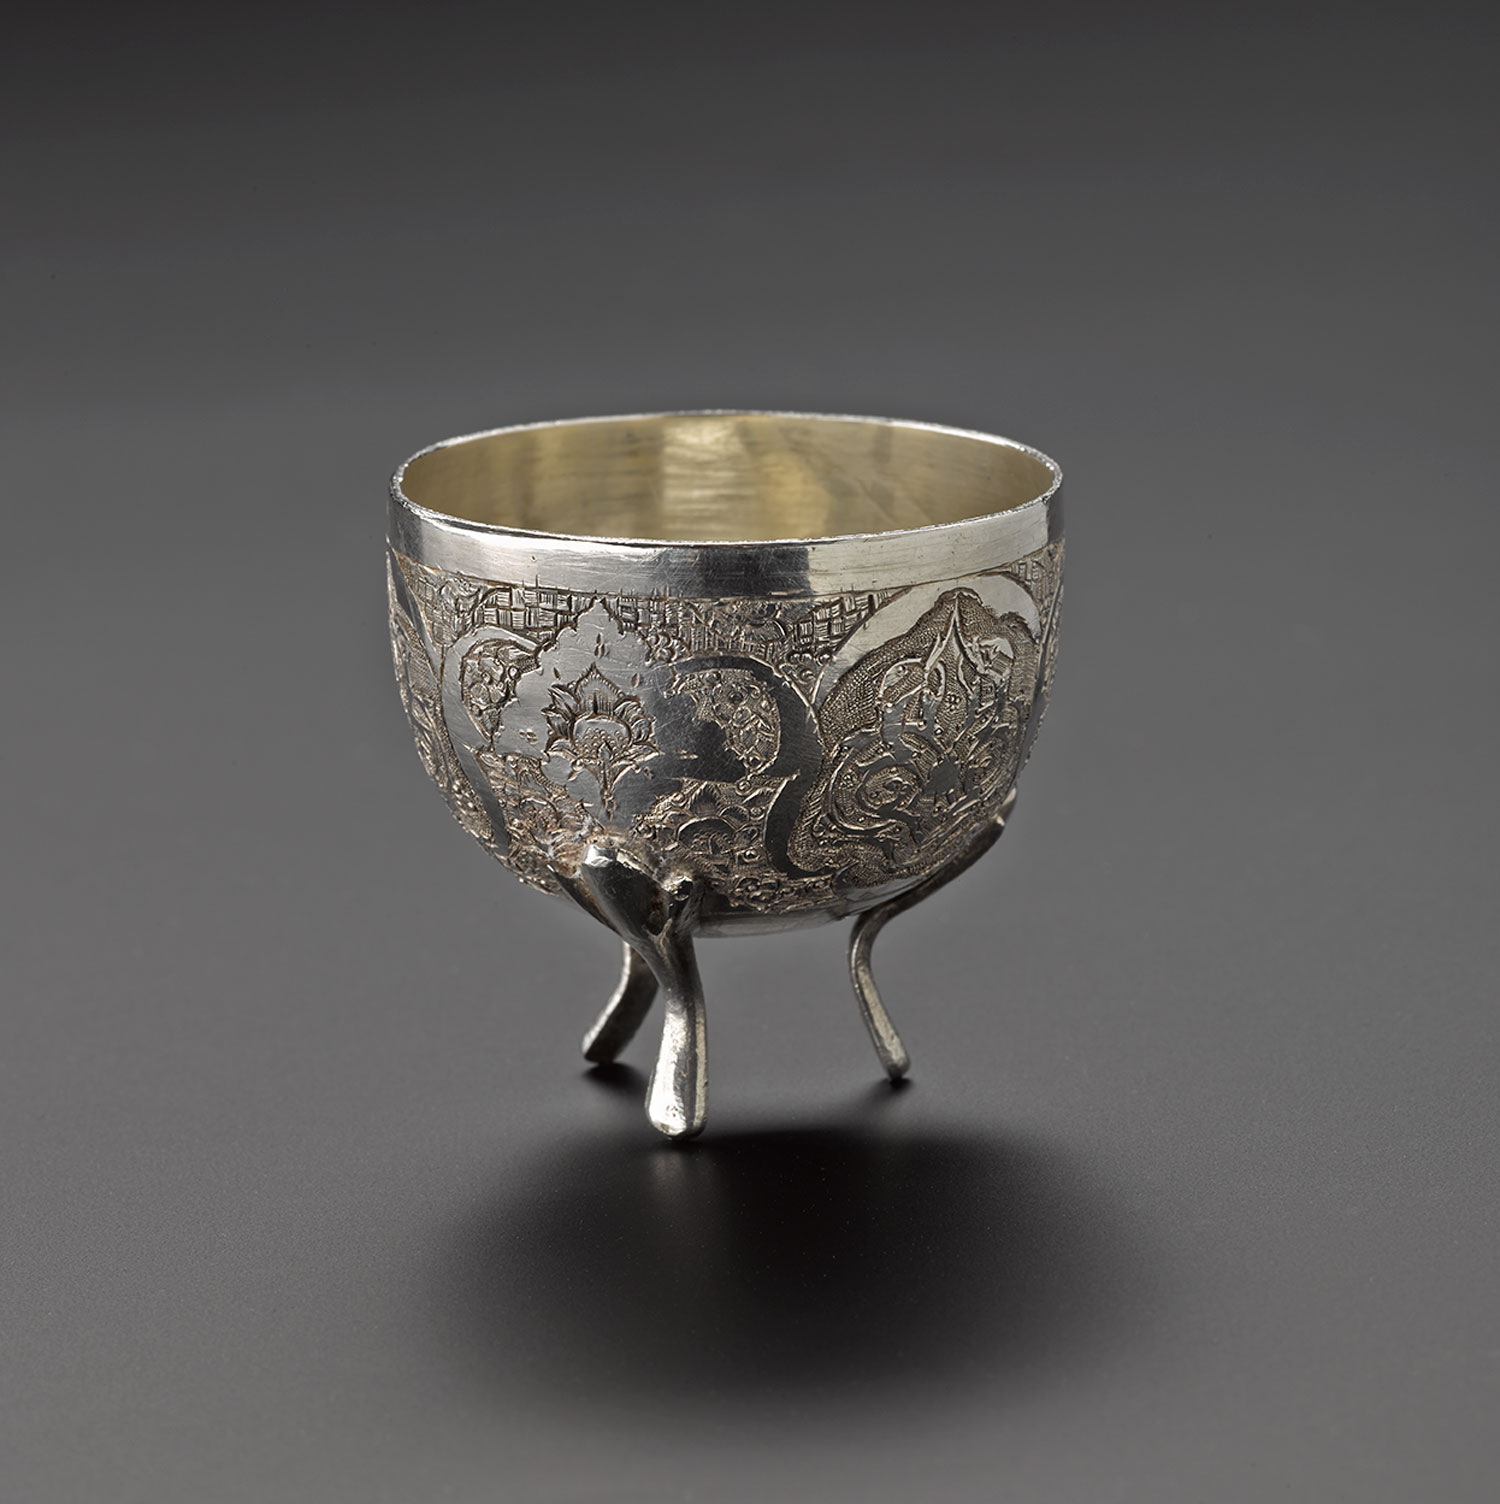 Bowl of silver, with three feet and chased stylized floral decoration around the outside, used as part of a set with a spoon: Iran, probably Isfahan, 1920s-1940s, acc. no V.2015.69.1 